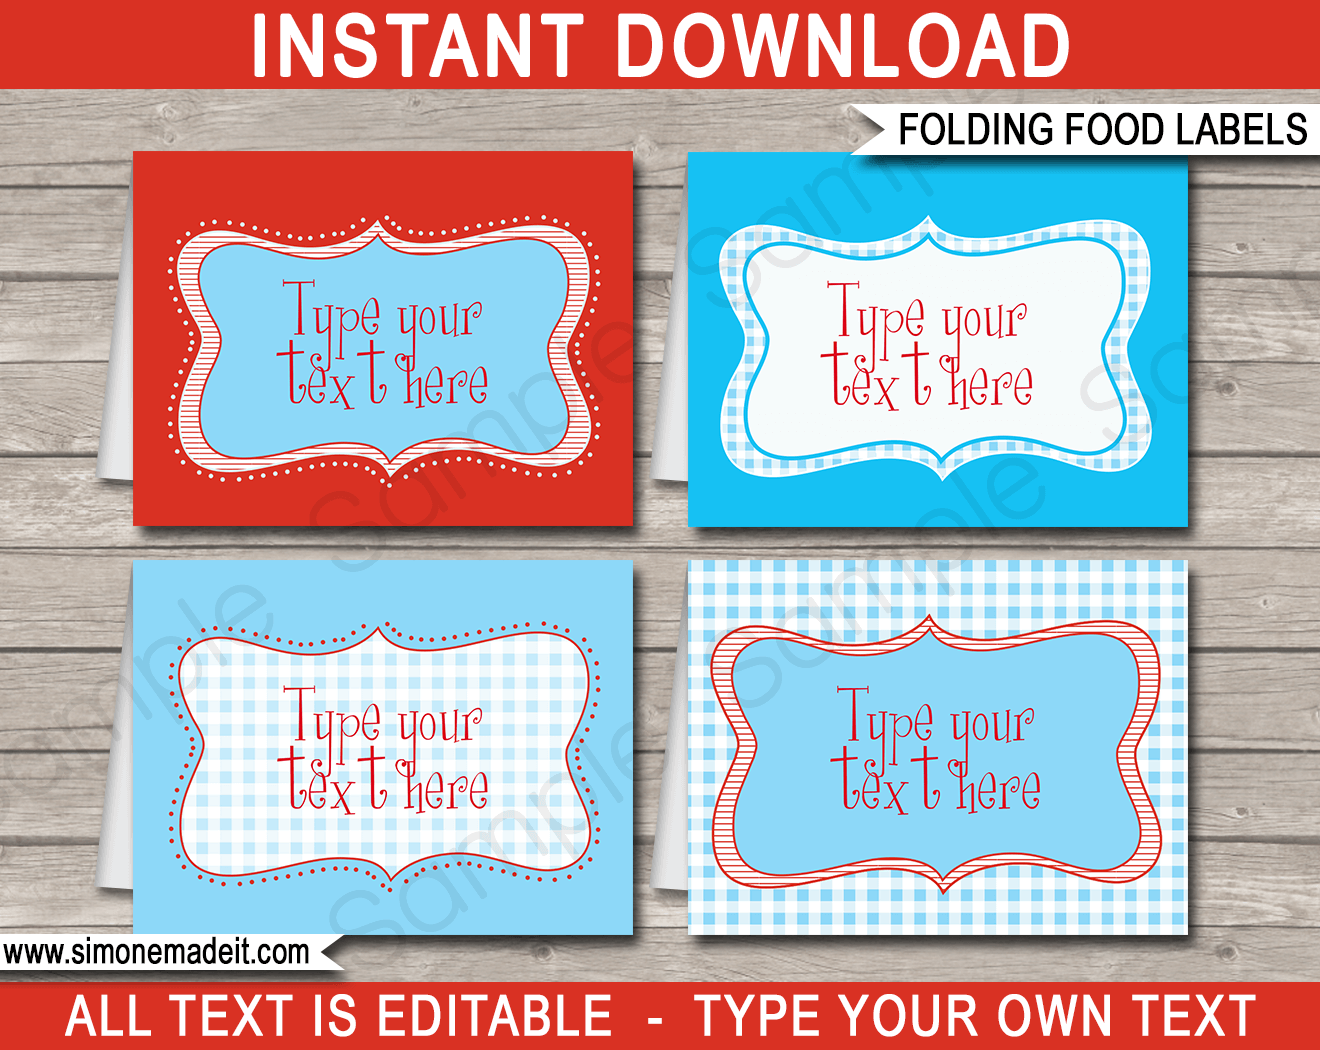 Wizard of Oz Theme Food Labels template | Place Cards | Printable Birthday Party Decorations | DIY Editable template | INSTANT DOWNLOAD via simonemadeit.com